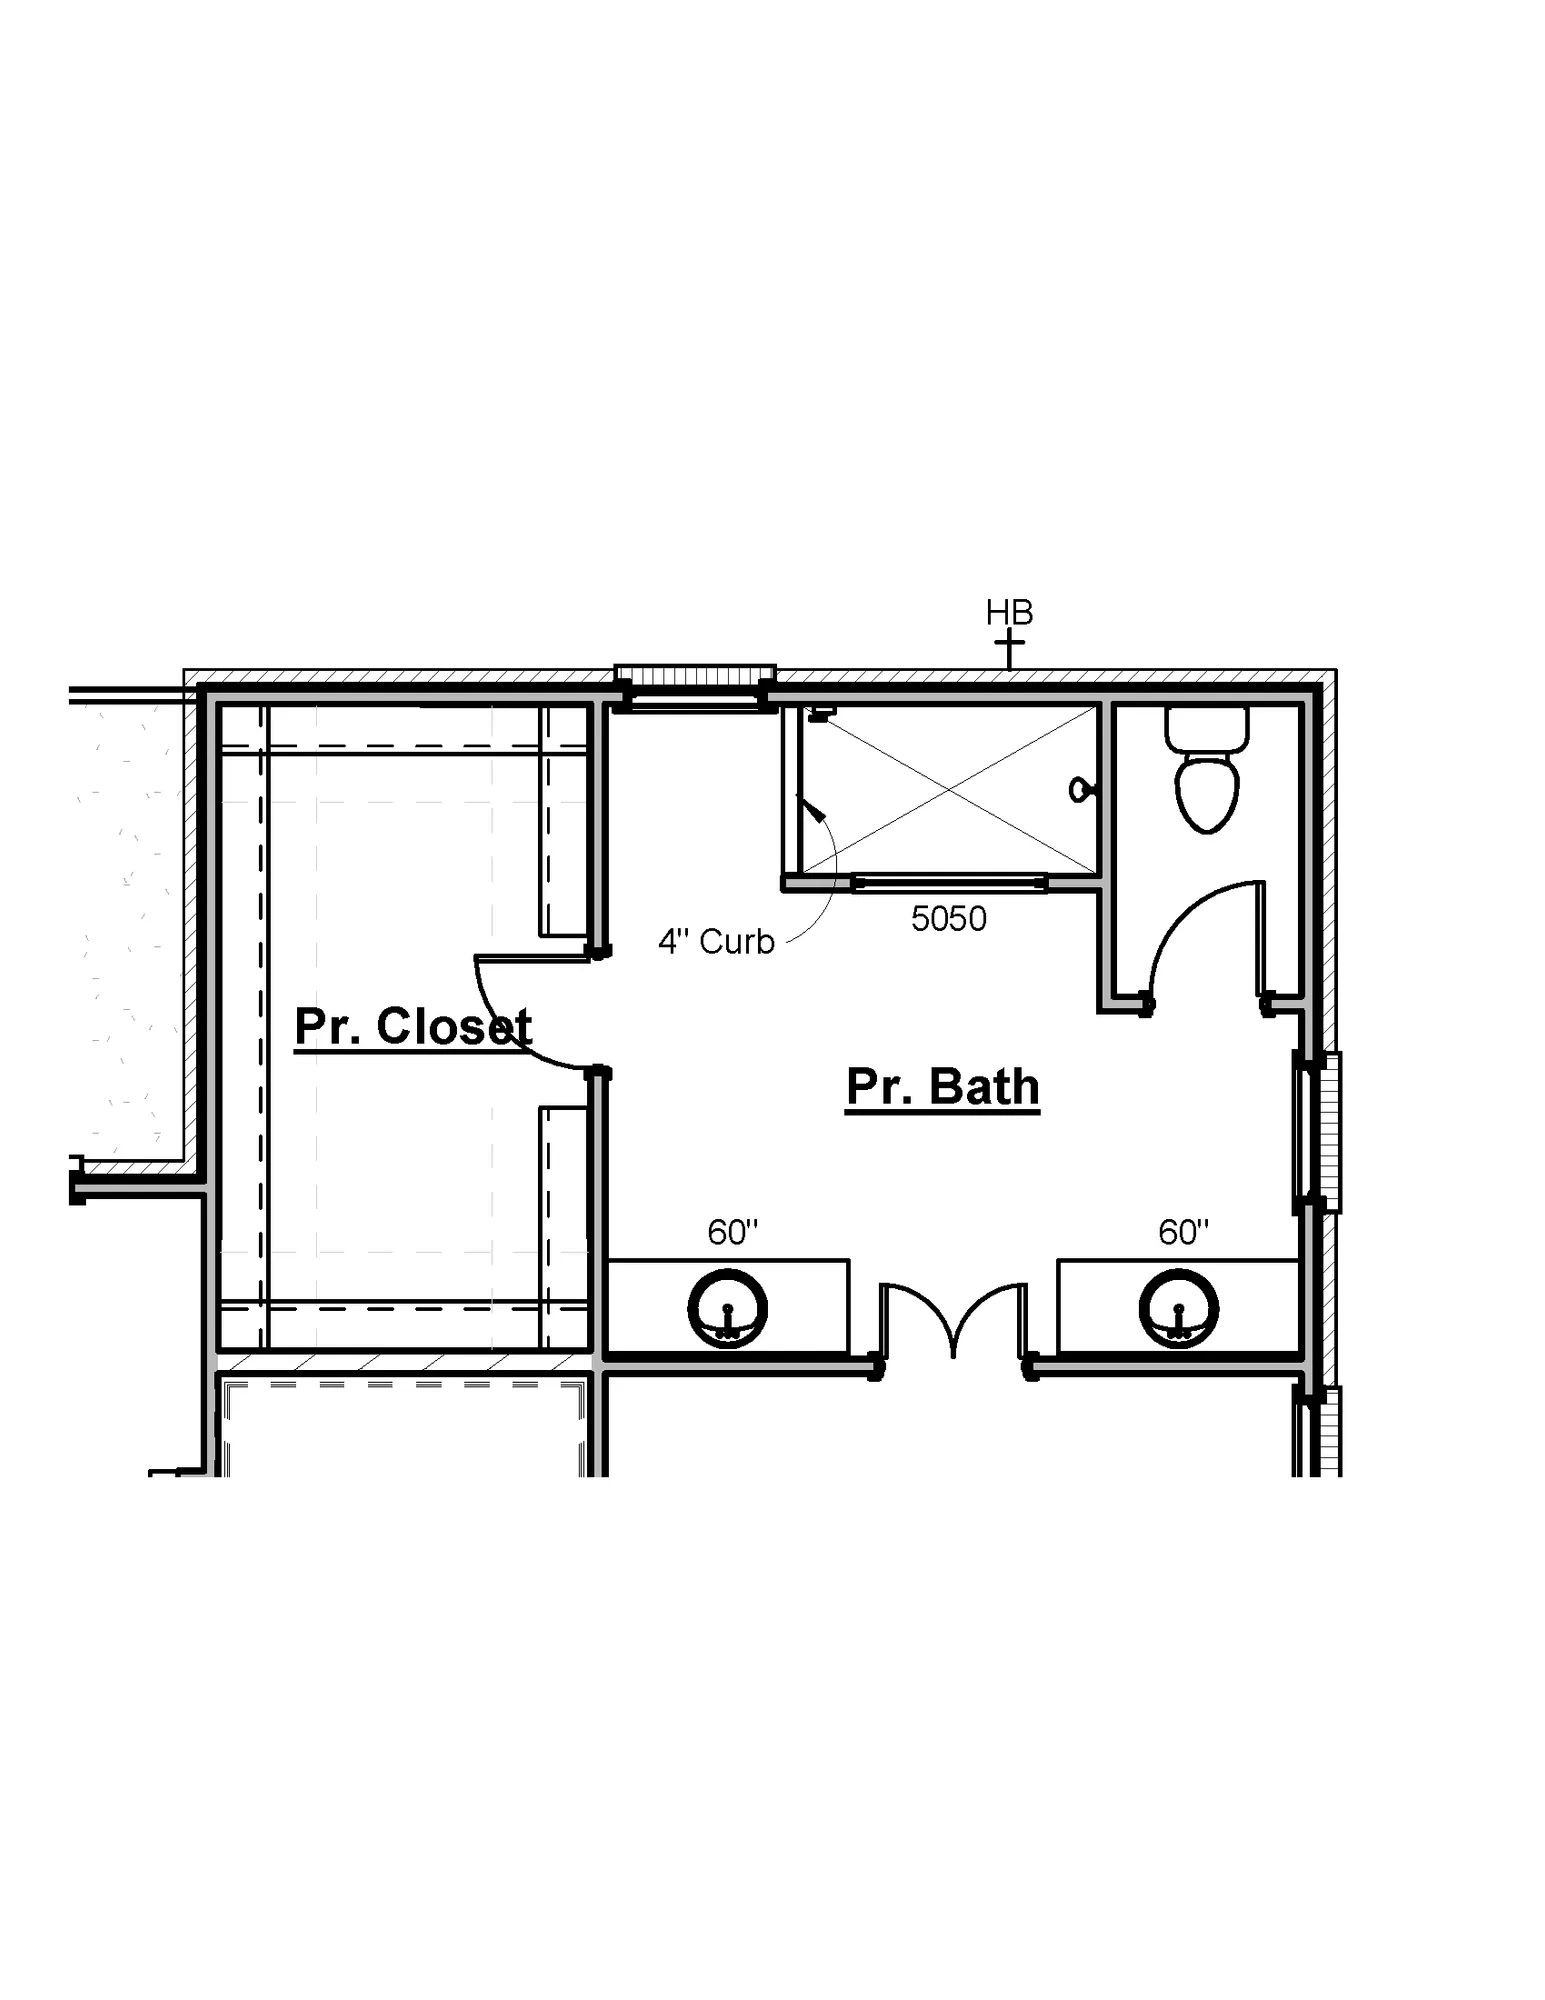 Shower Only - Primary Bath - undefined